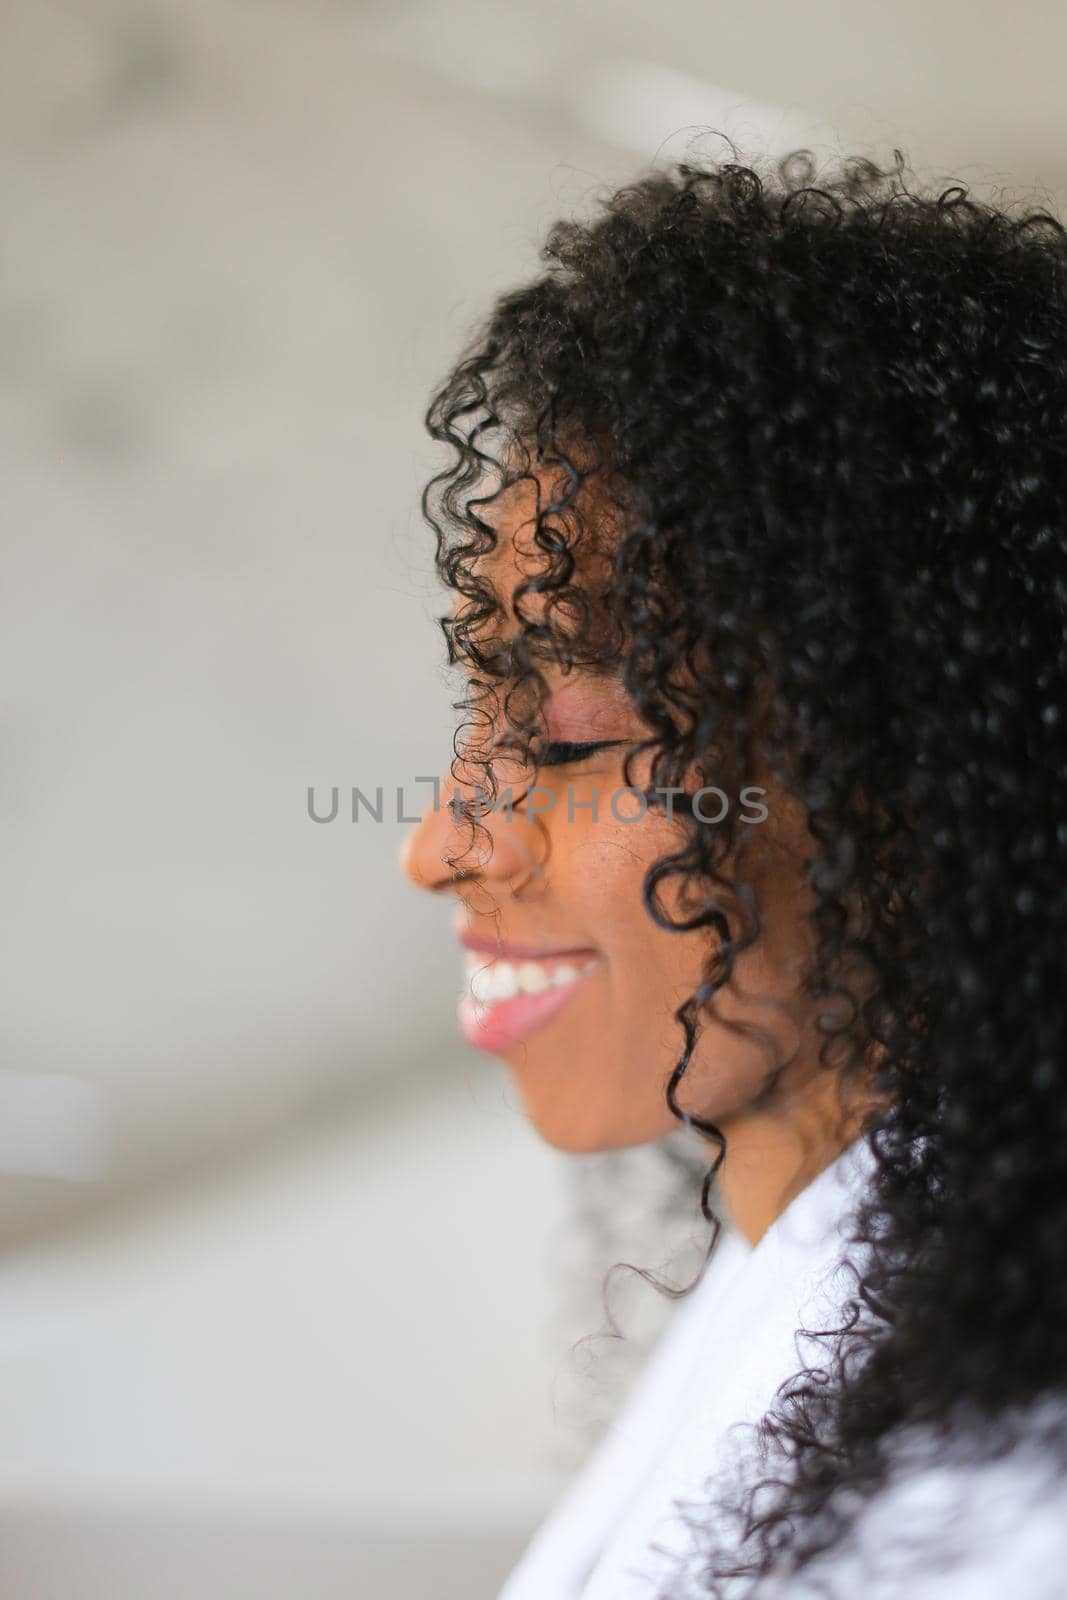 Portrait of smiling afro american curly haired young woman. Concept of african female beauty.